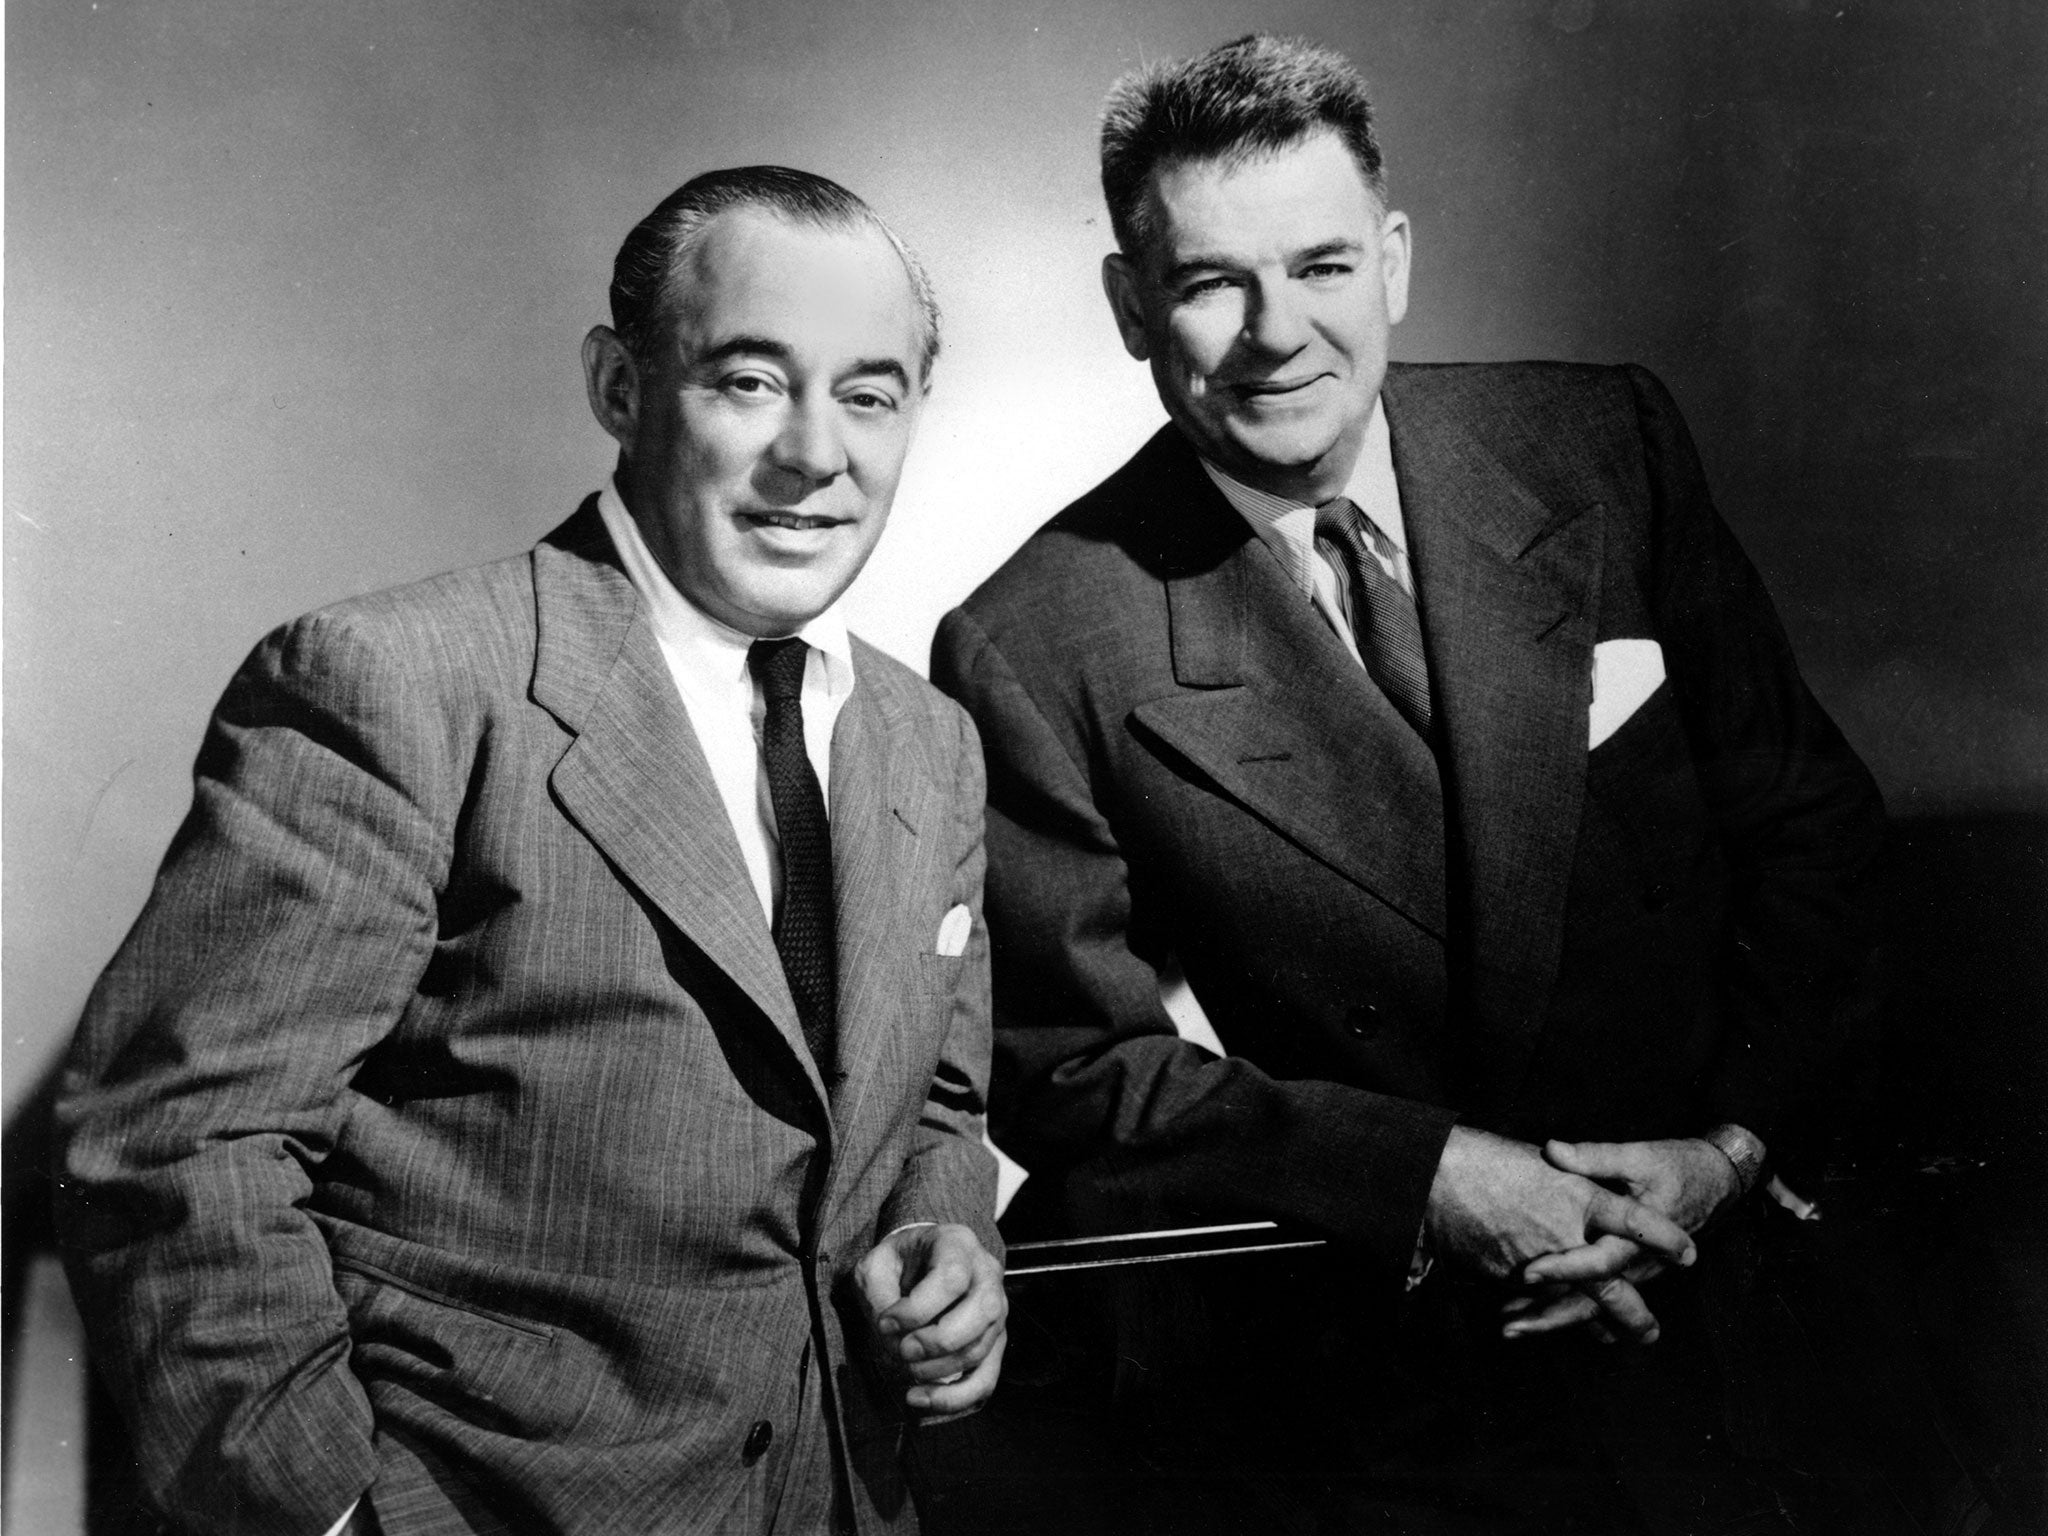 Oscar Hammerstein, right, with Composer Richard Rodgers